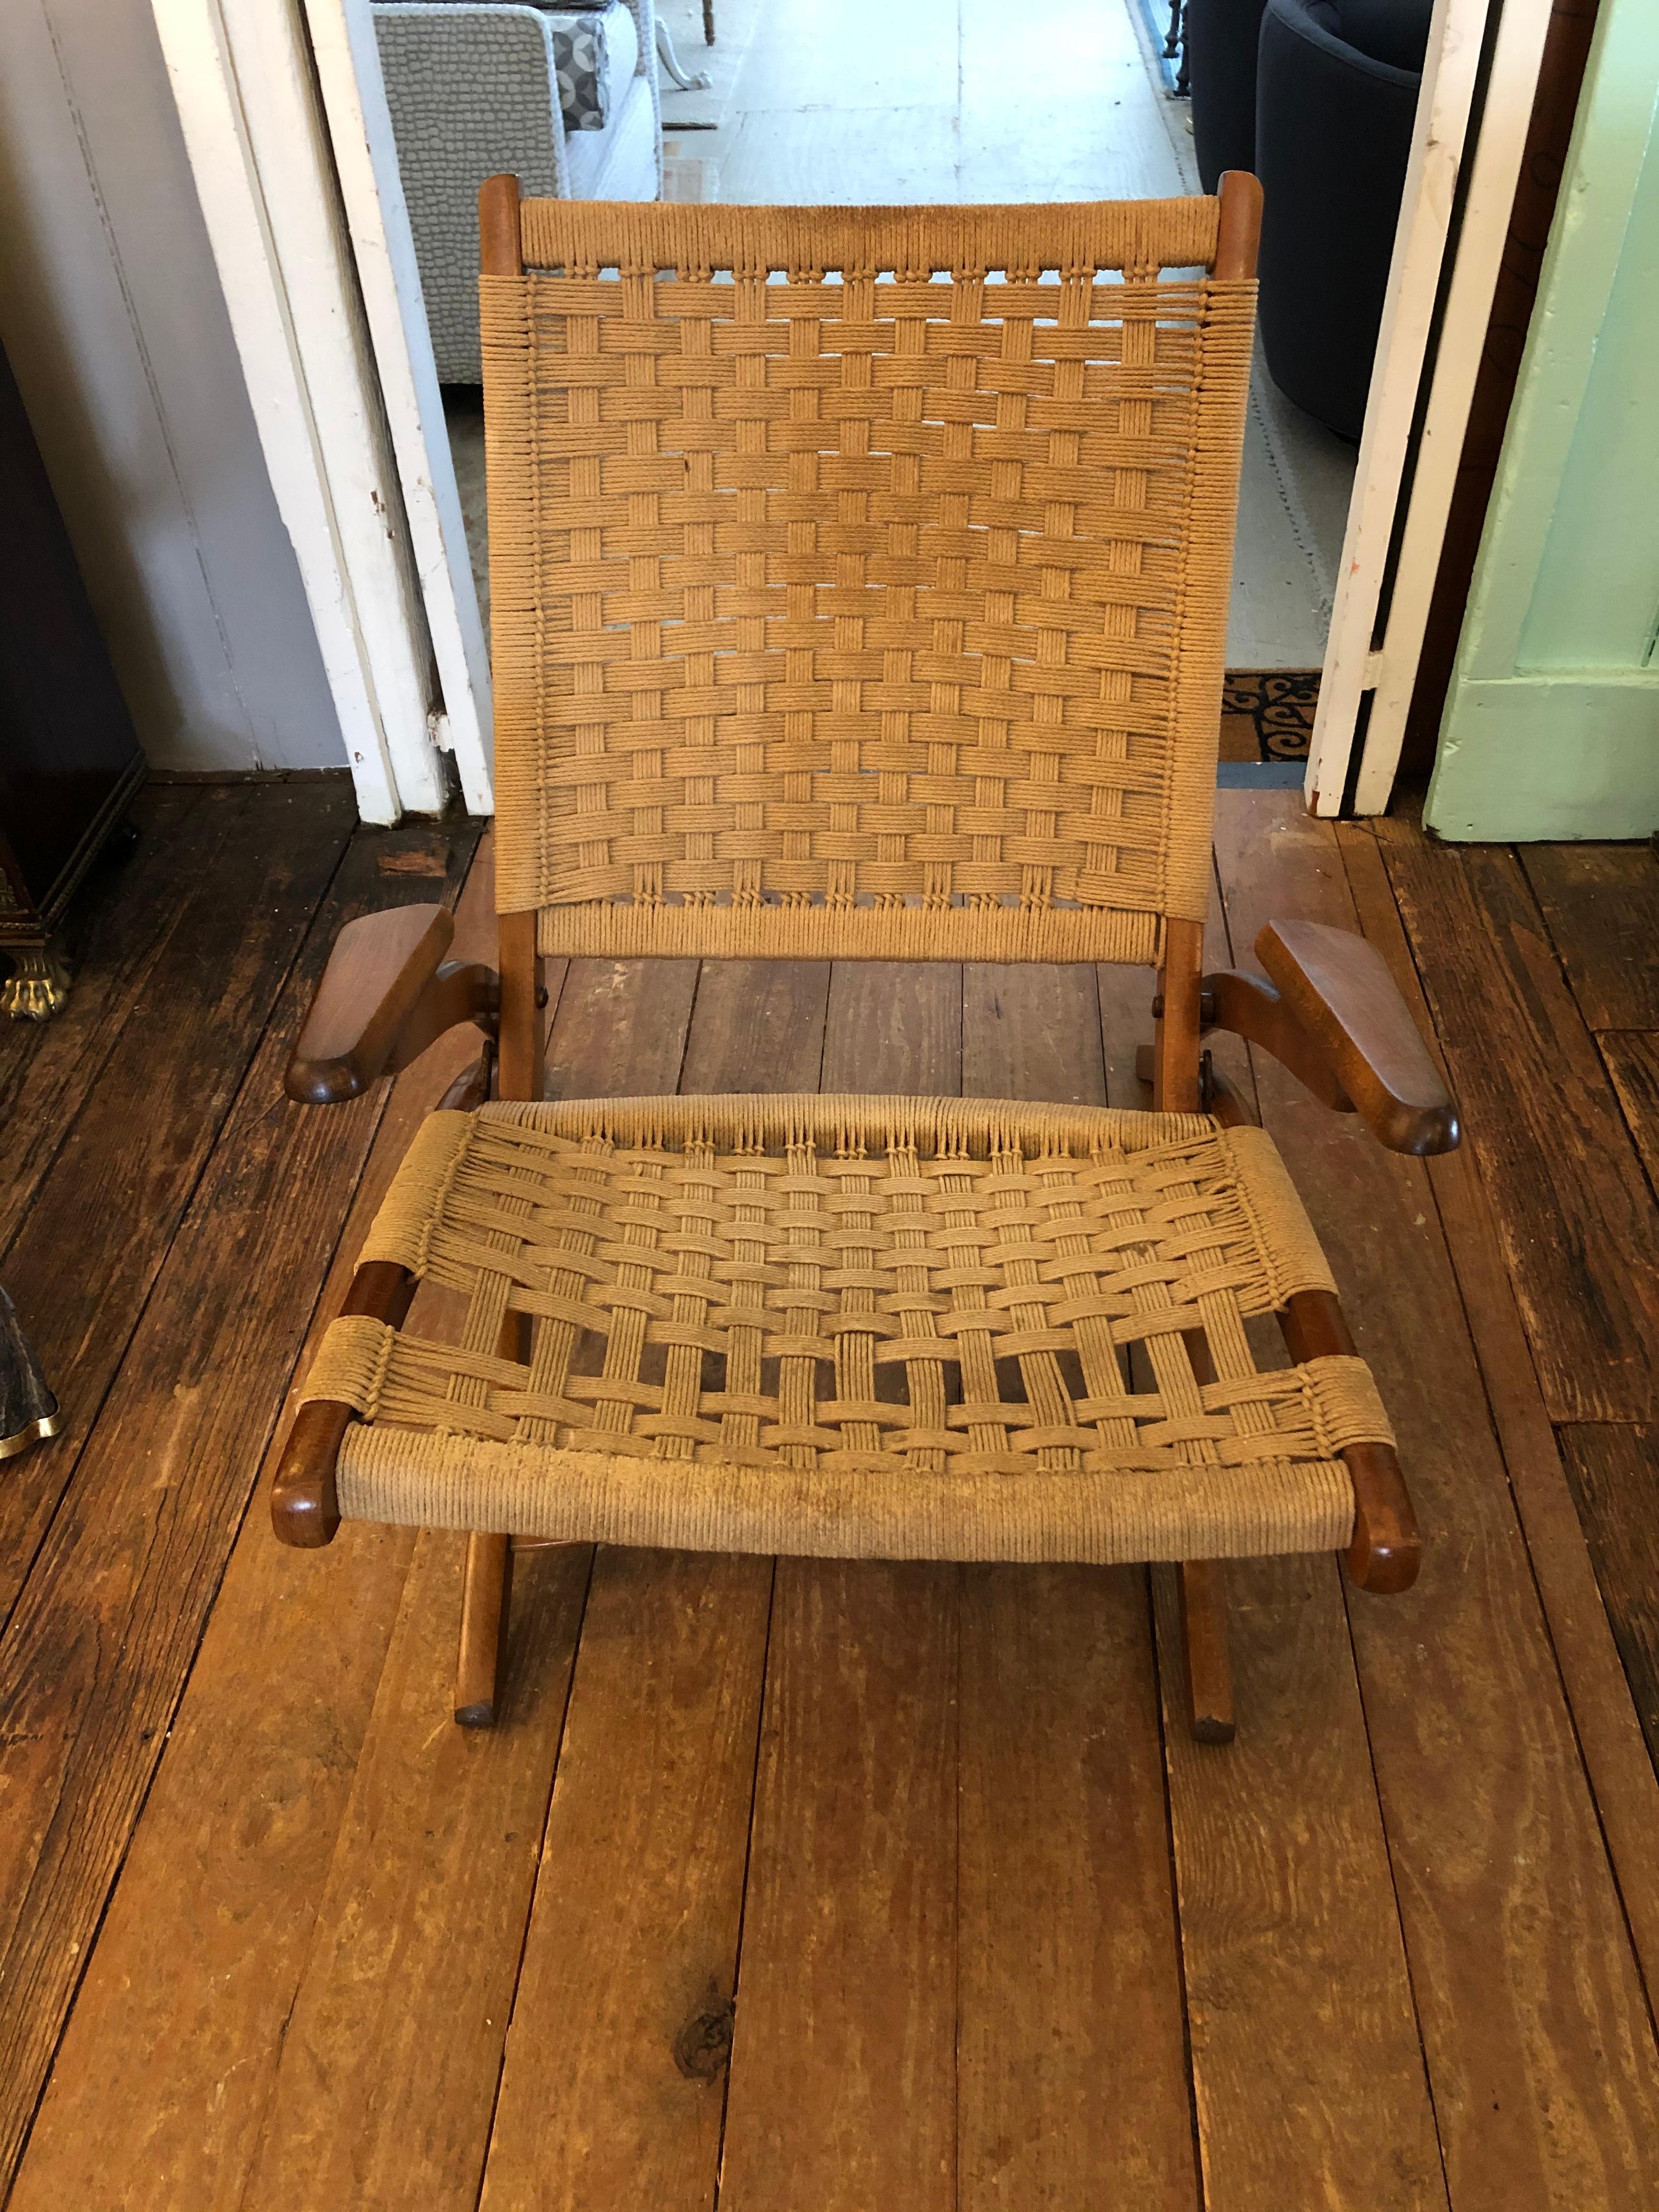 An ingeniously designed Mid-Century Modern woven rope chair having a low slung silhouette, handsome sleek wood arms and folding legs. Very comfortable and obviously portable.